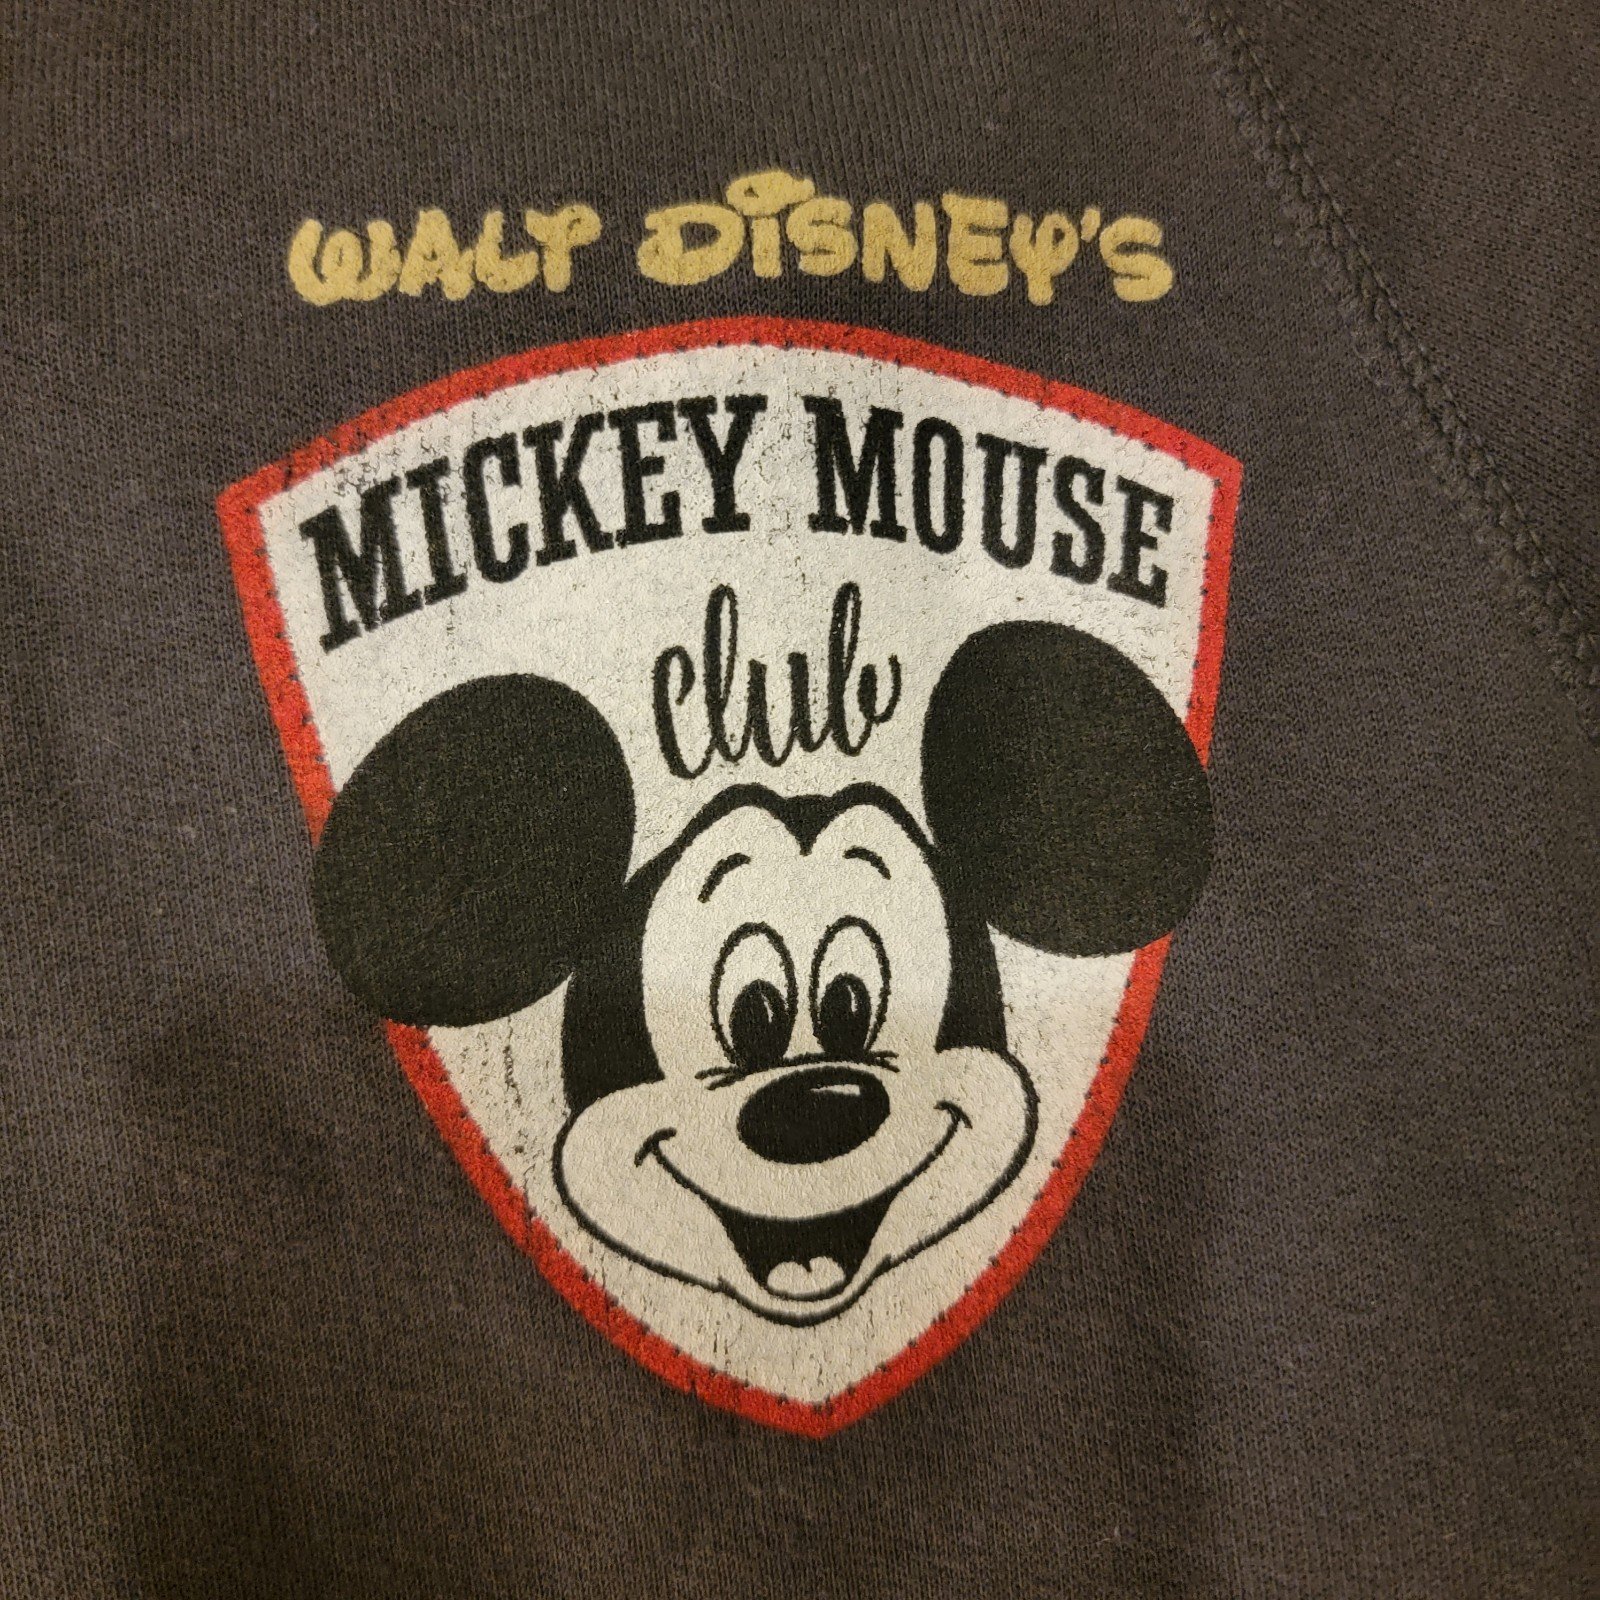 reasonable price Disney Parks Walt Disney’s Mickey Mouse Club Zip-Up Hoodie Size Small P2cPxLyCt Low Price